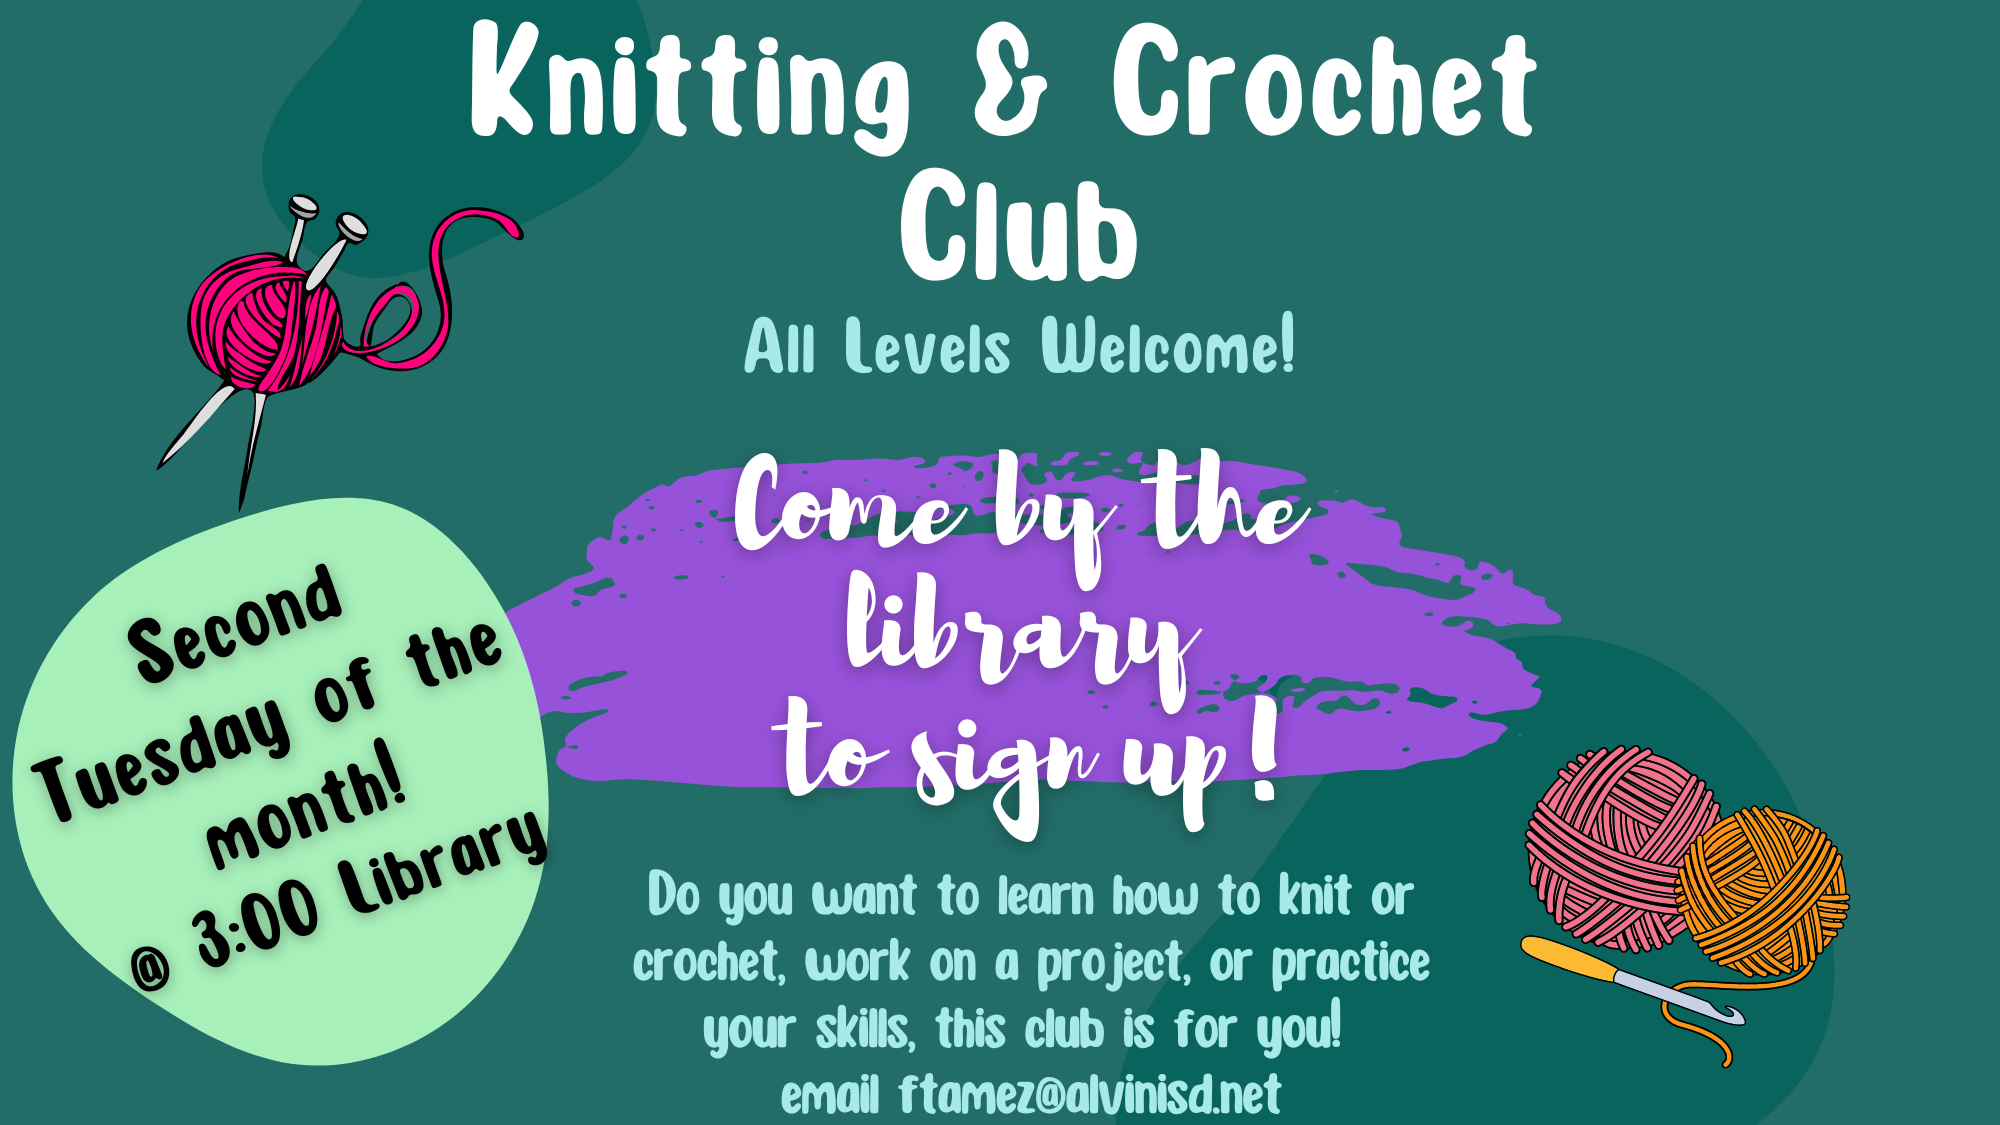 Knit and Crochet club! Do you want to learn how to knit or crochet, work on a project, or practice your skills, this club is for you. Come by the library to sign up! Meeting held the second Tuesday of the month - Library, at 3pm. Email ftamez@alvinisd.net